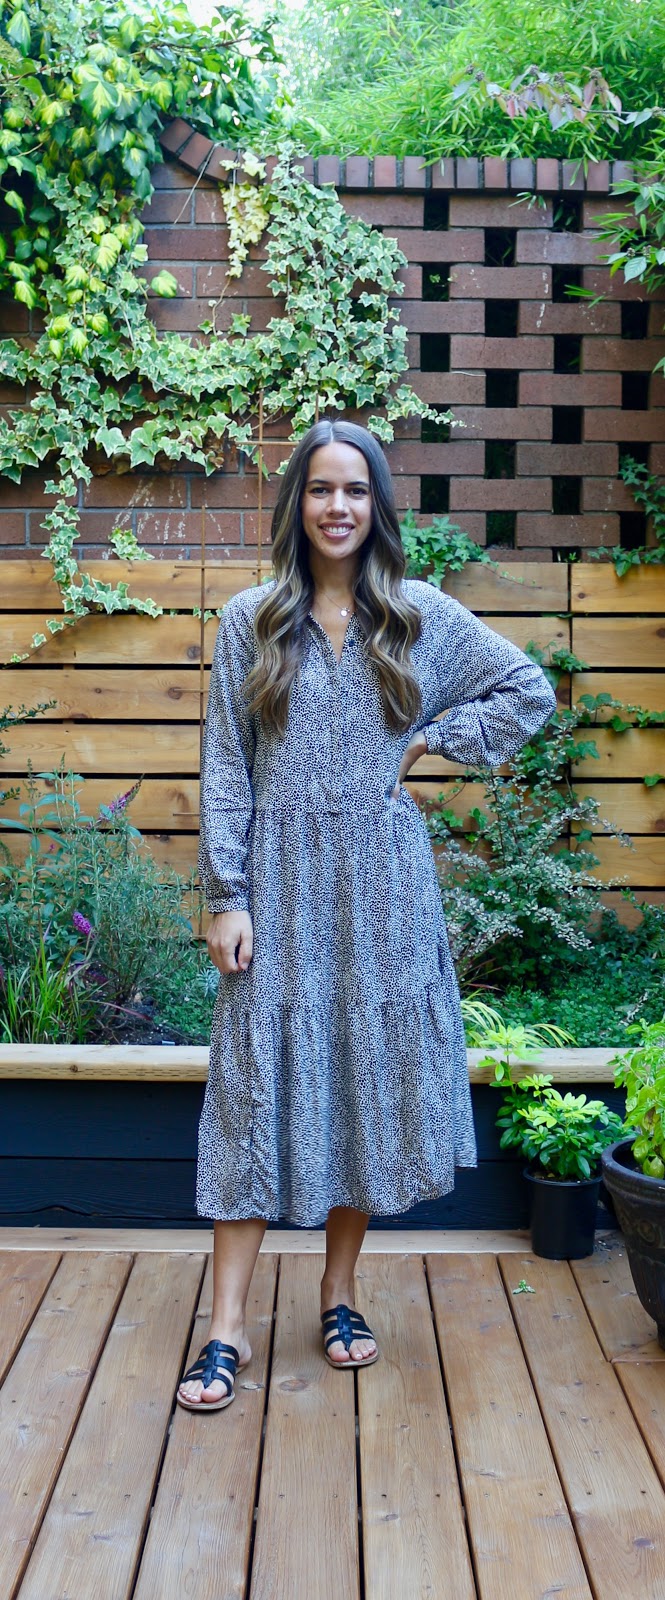 Jules in Flats - H&M Long Sleeve Midi Dress (Business Casual Workwear on a Budget)